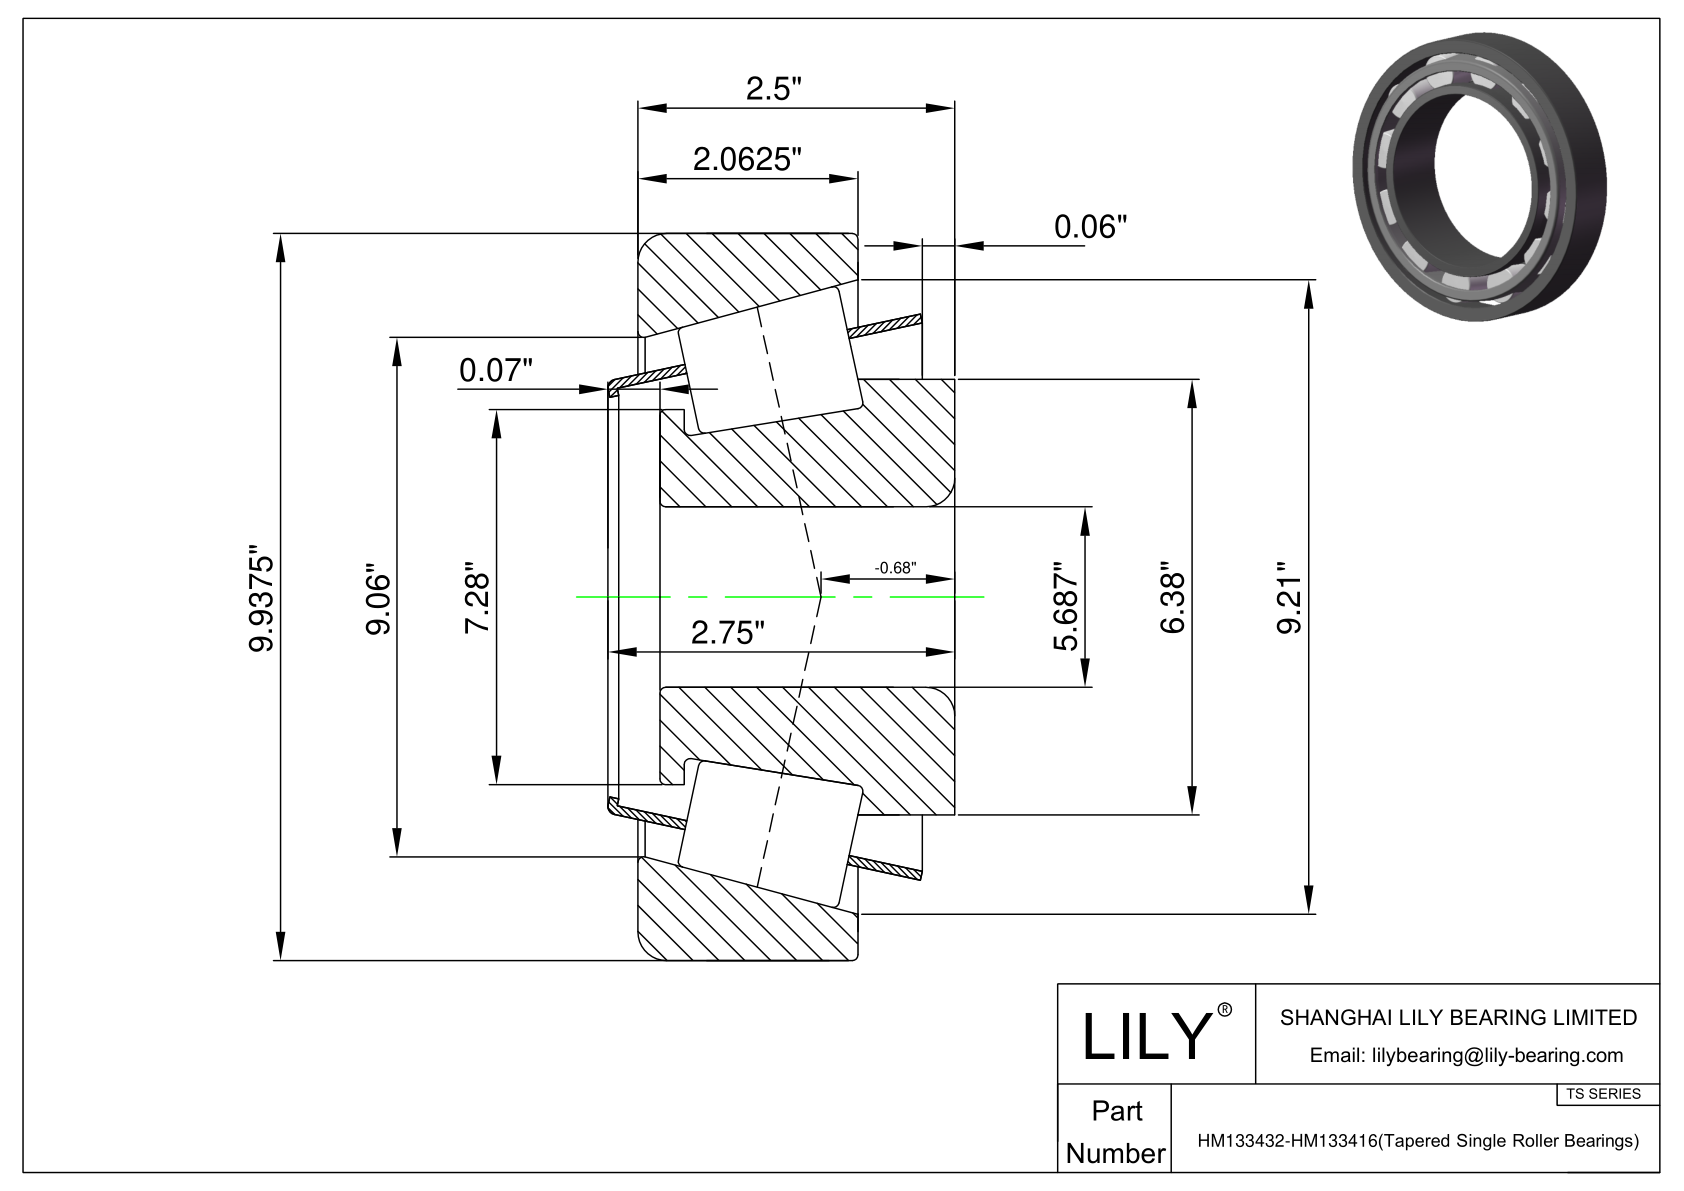 HM133432-HM133416 TS (Tapered Single Roller Bearings) (Imperial) cad drawing